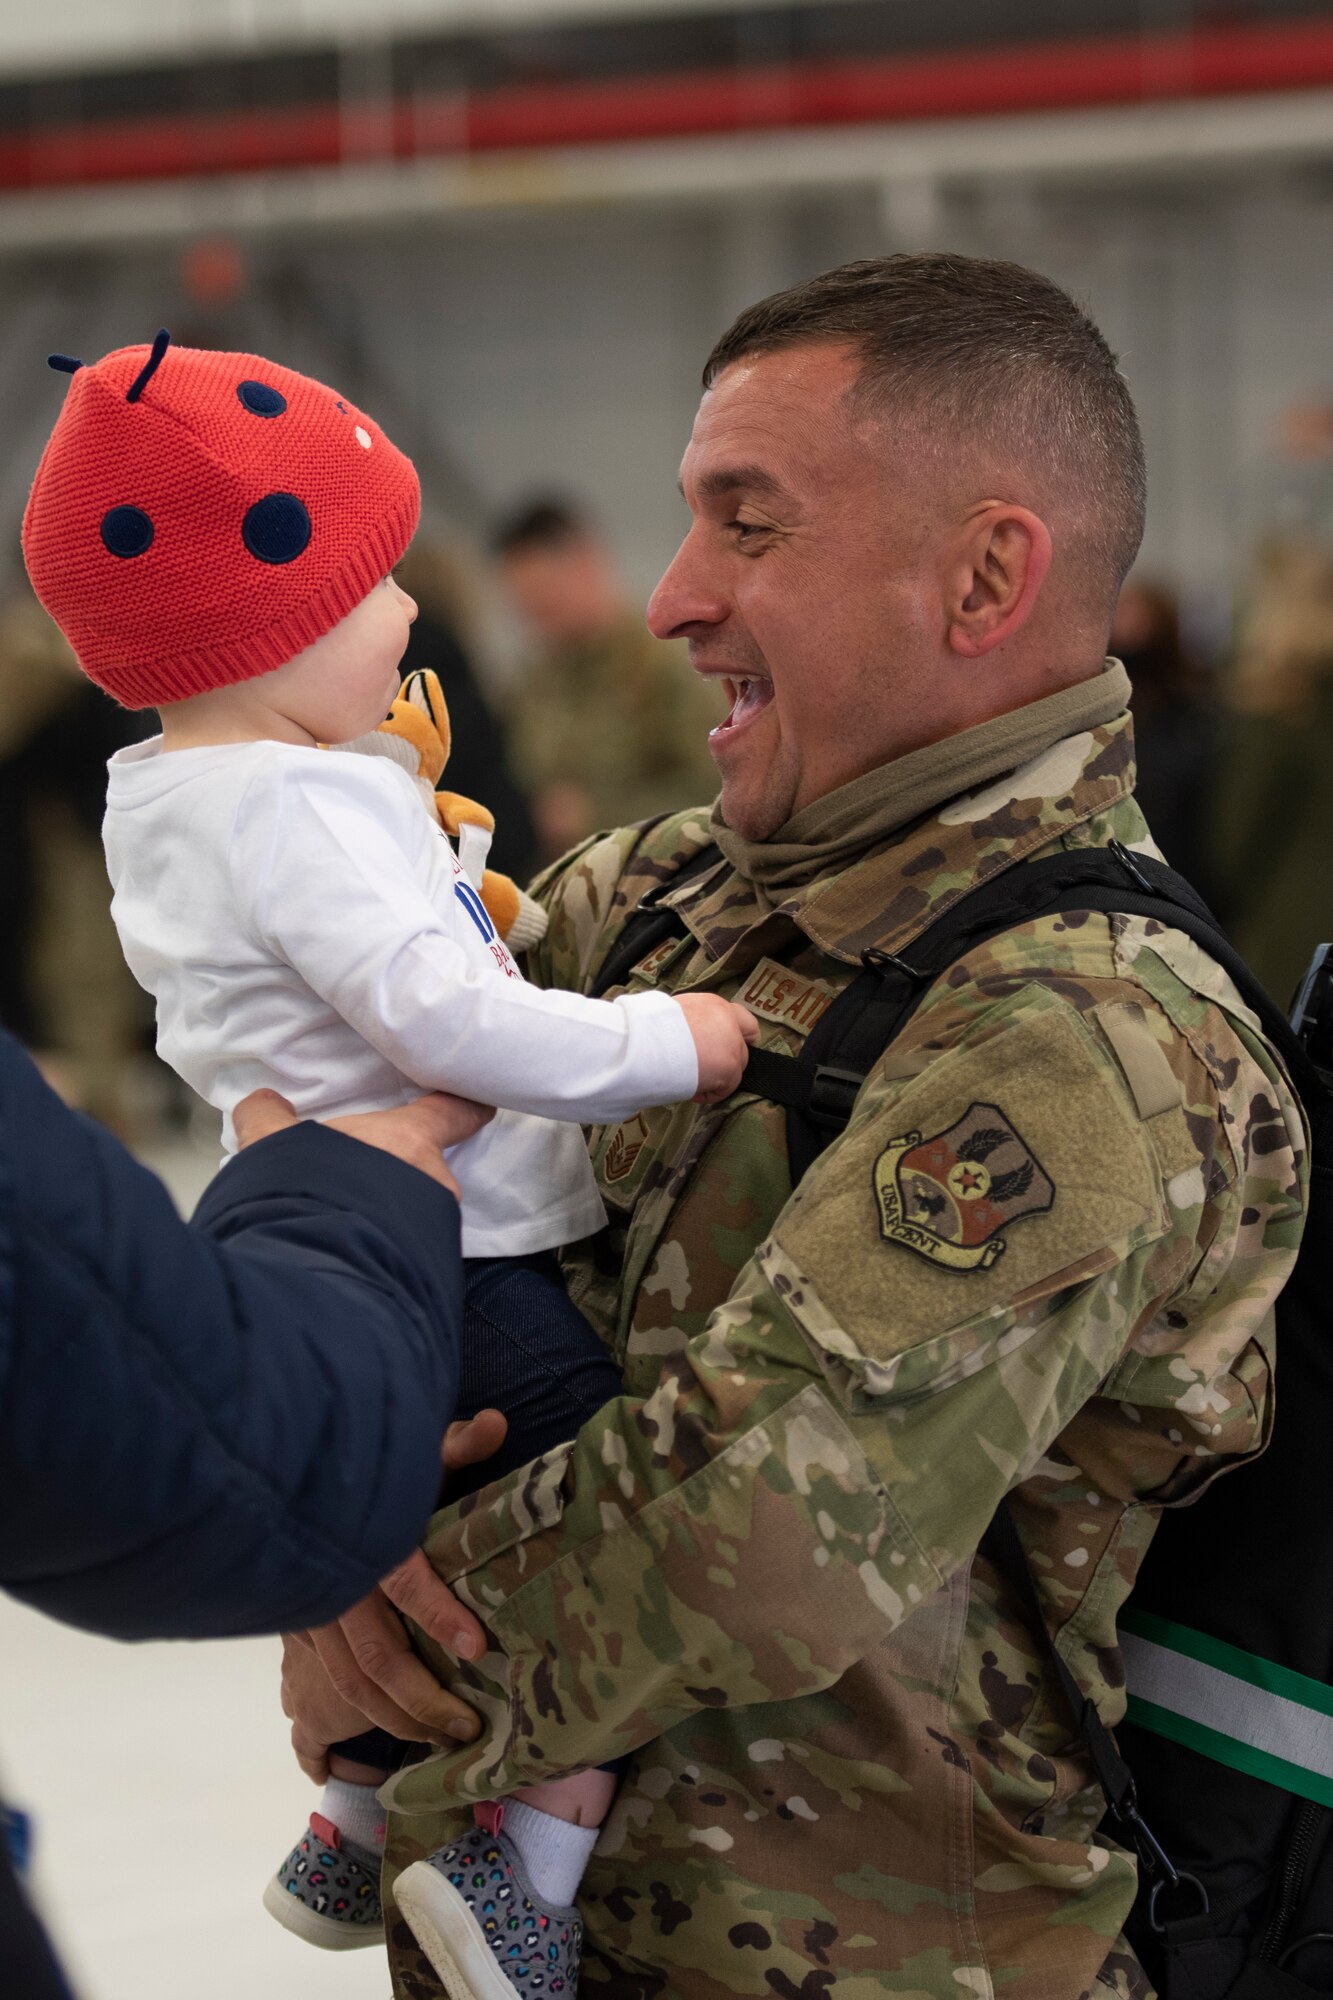 Master Sgt. David Harrison, a network systems operator, assigned to the Ohio National Guard’s 180th Fighter Wing, hold his daughter after returning home from their overseas deployment, Jan. 26, 2020 at the 180FW in Swanton, Ohio.